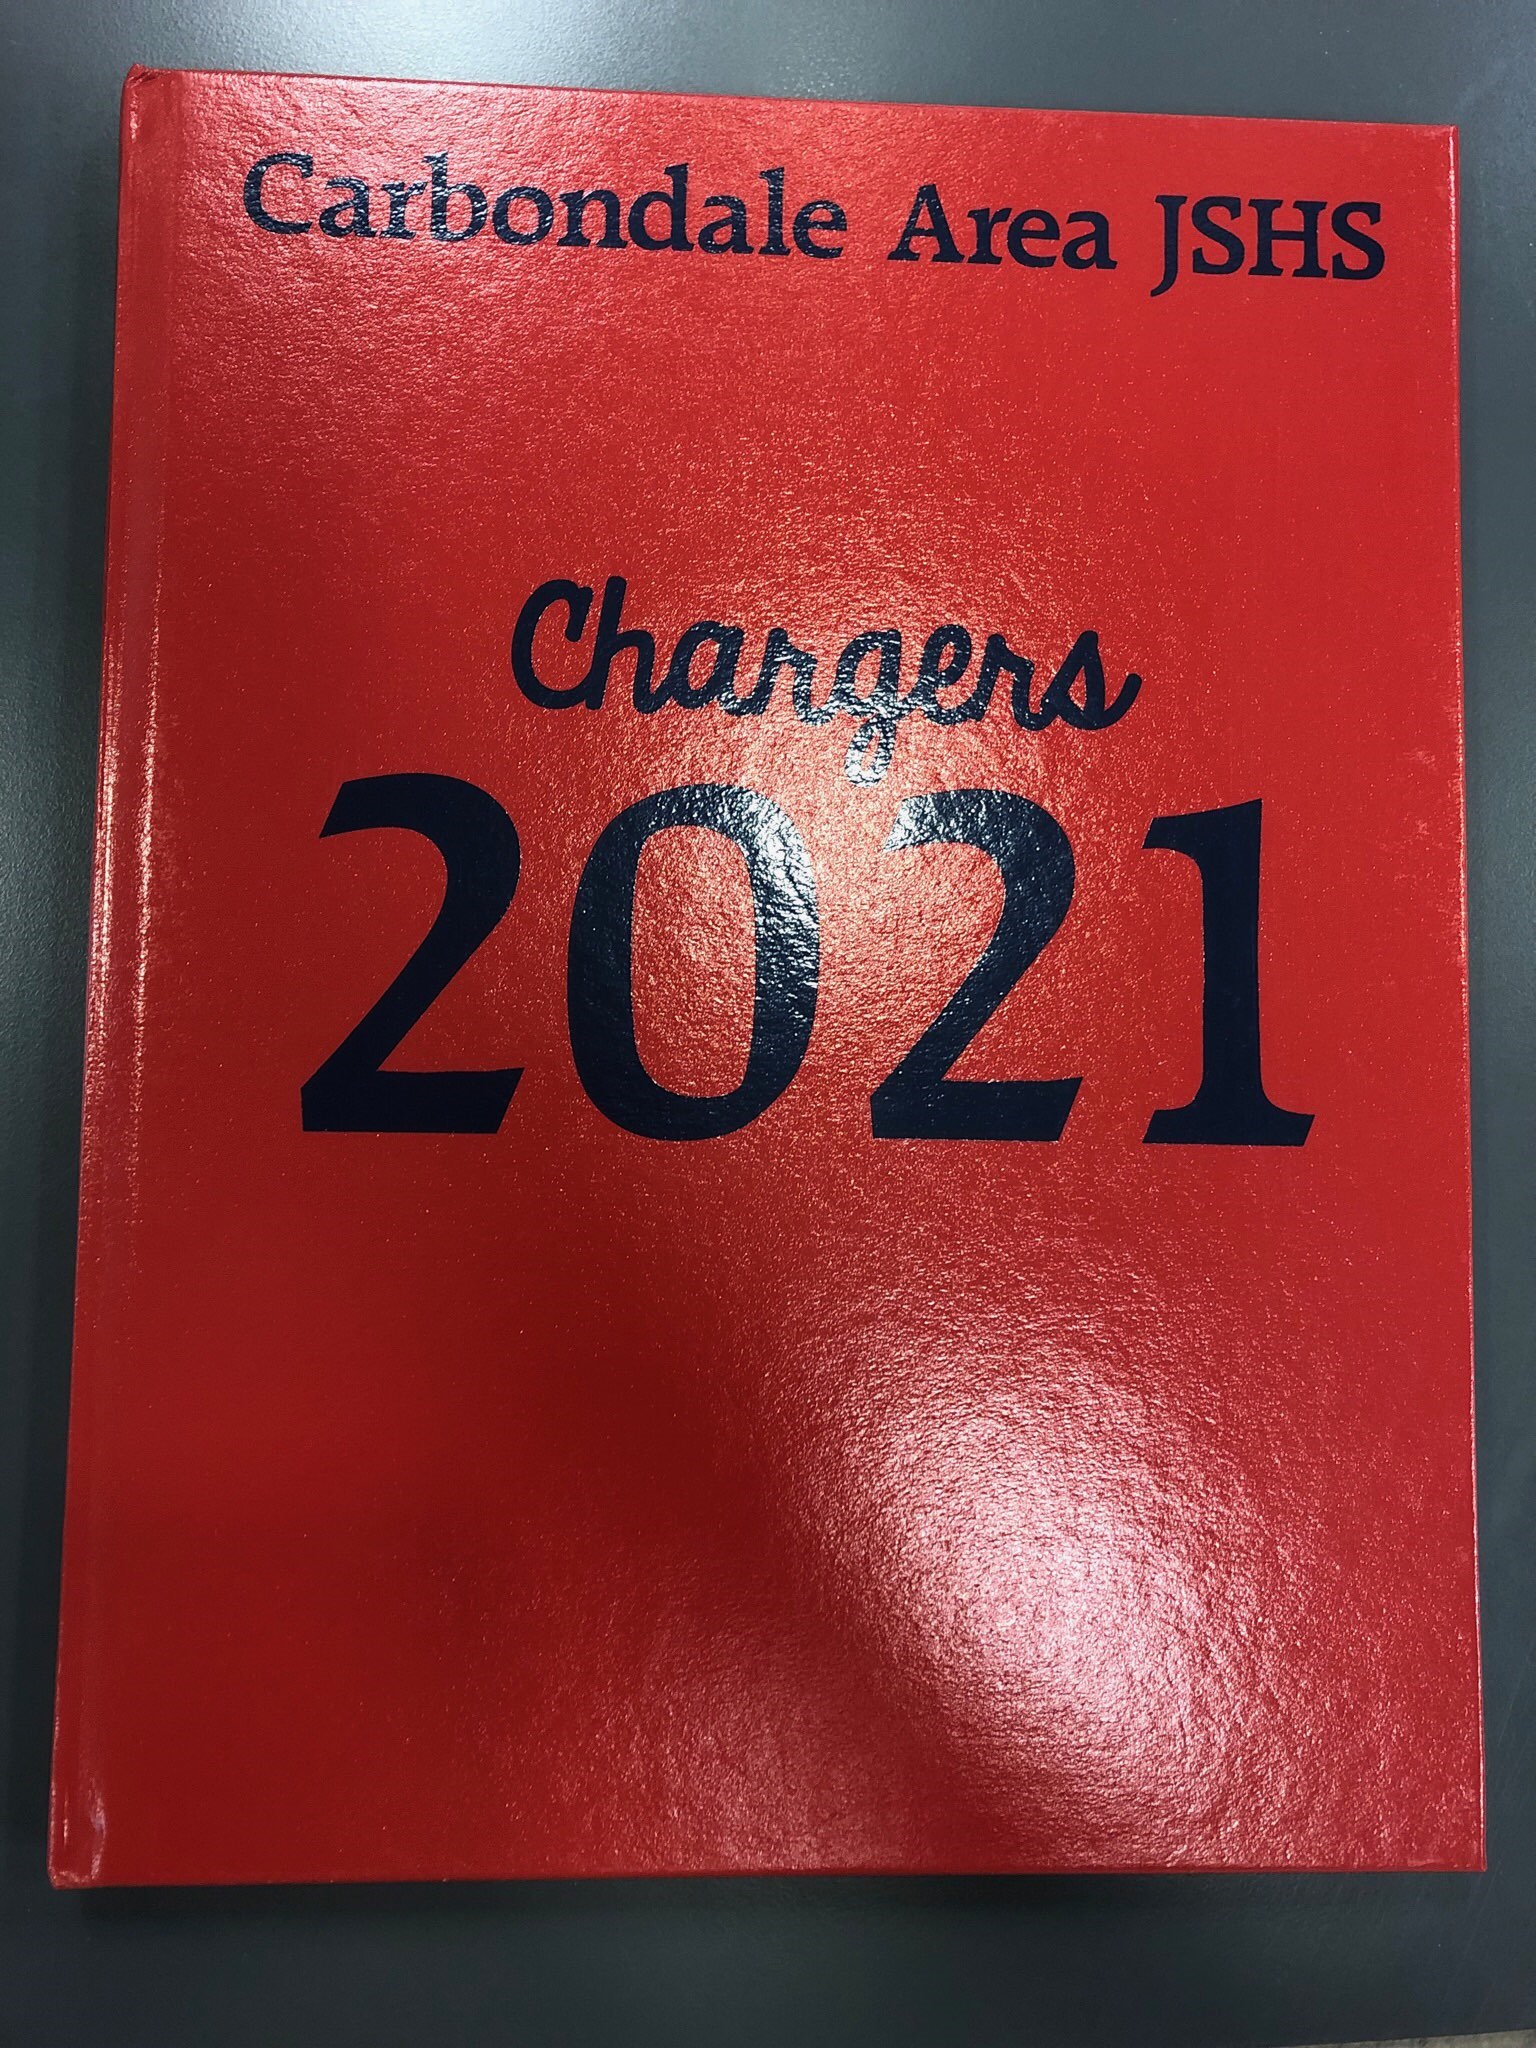 Class of 2021 Yearbooks Available for Pickup Starting Monday, August 9